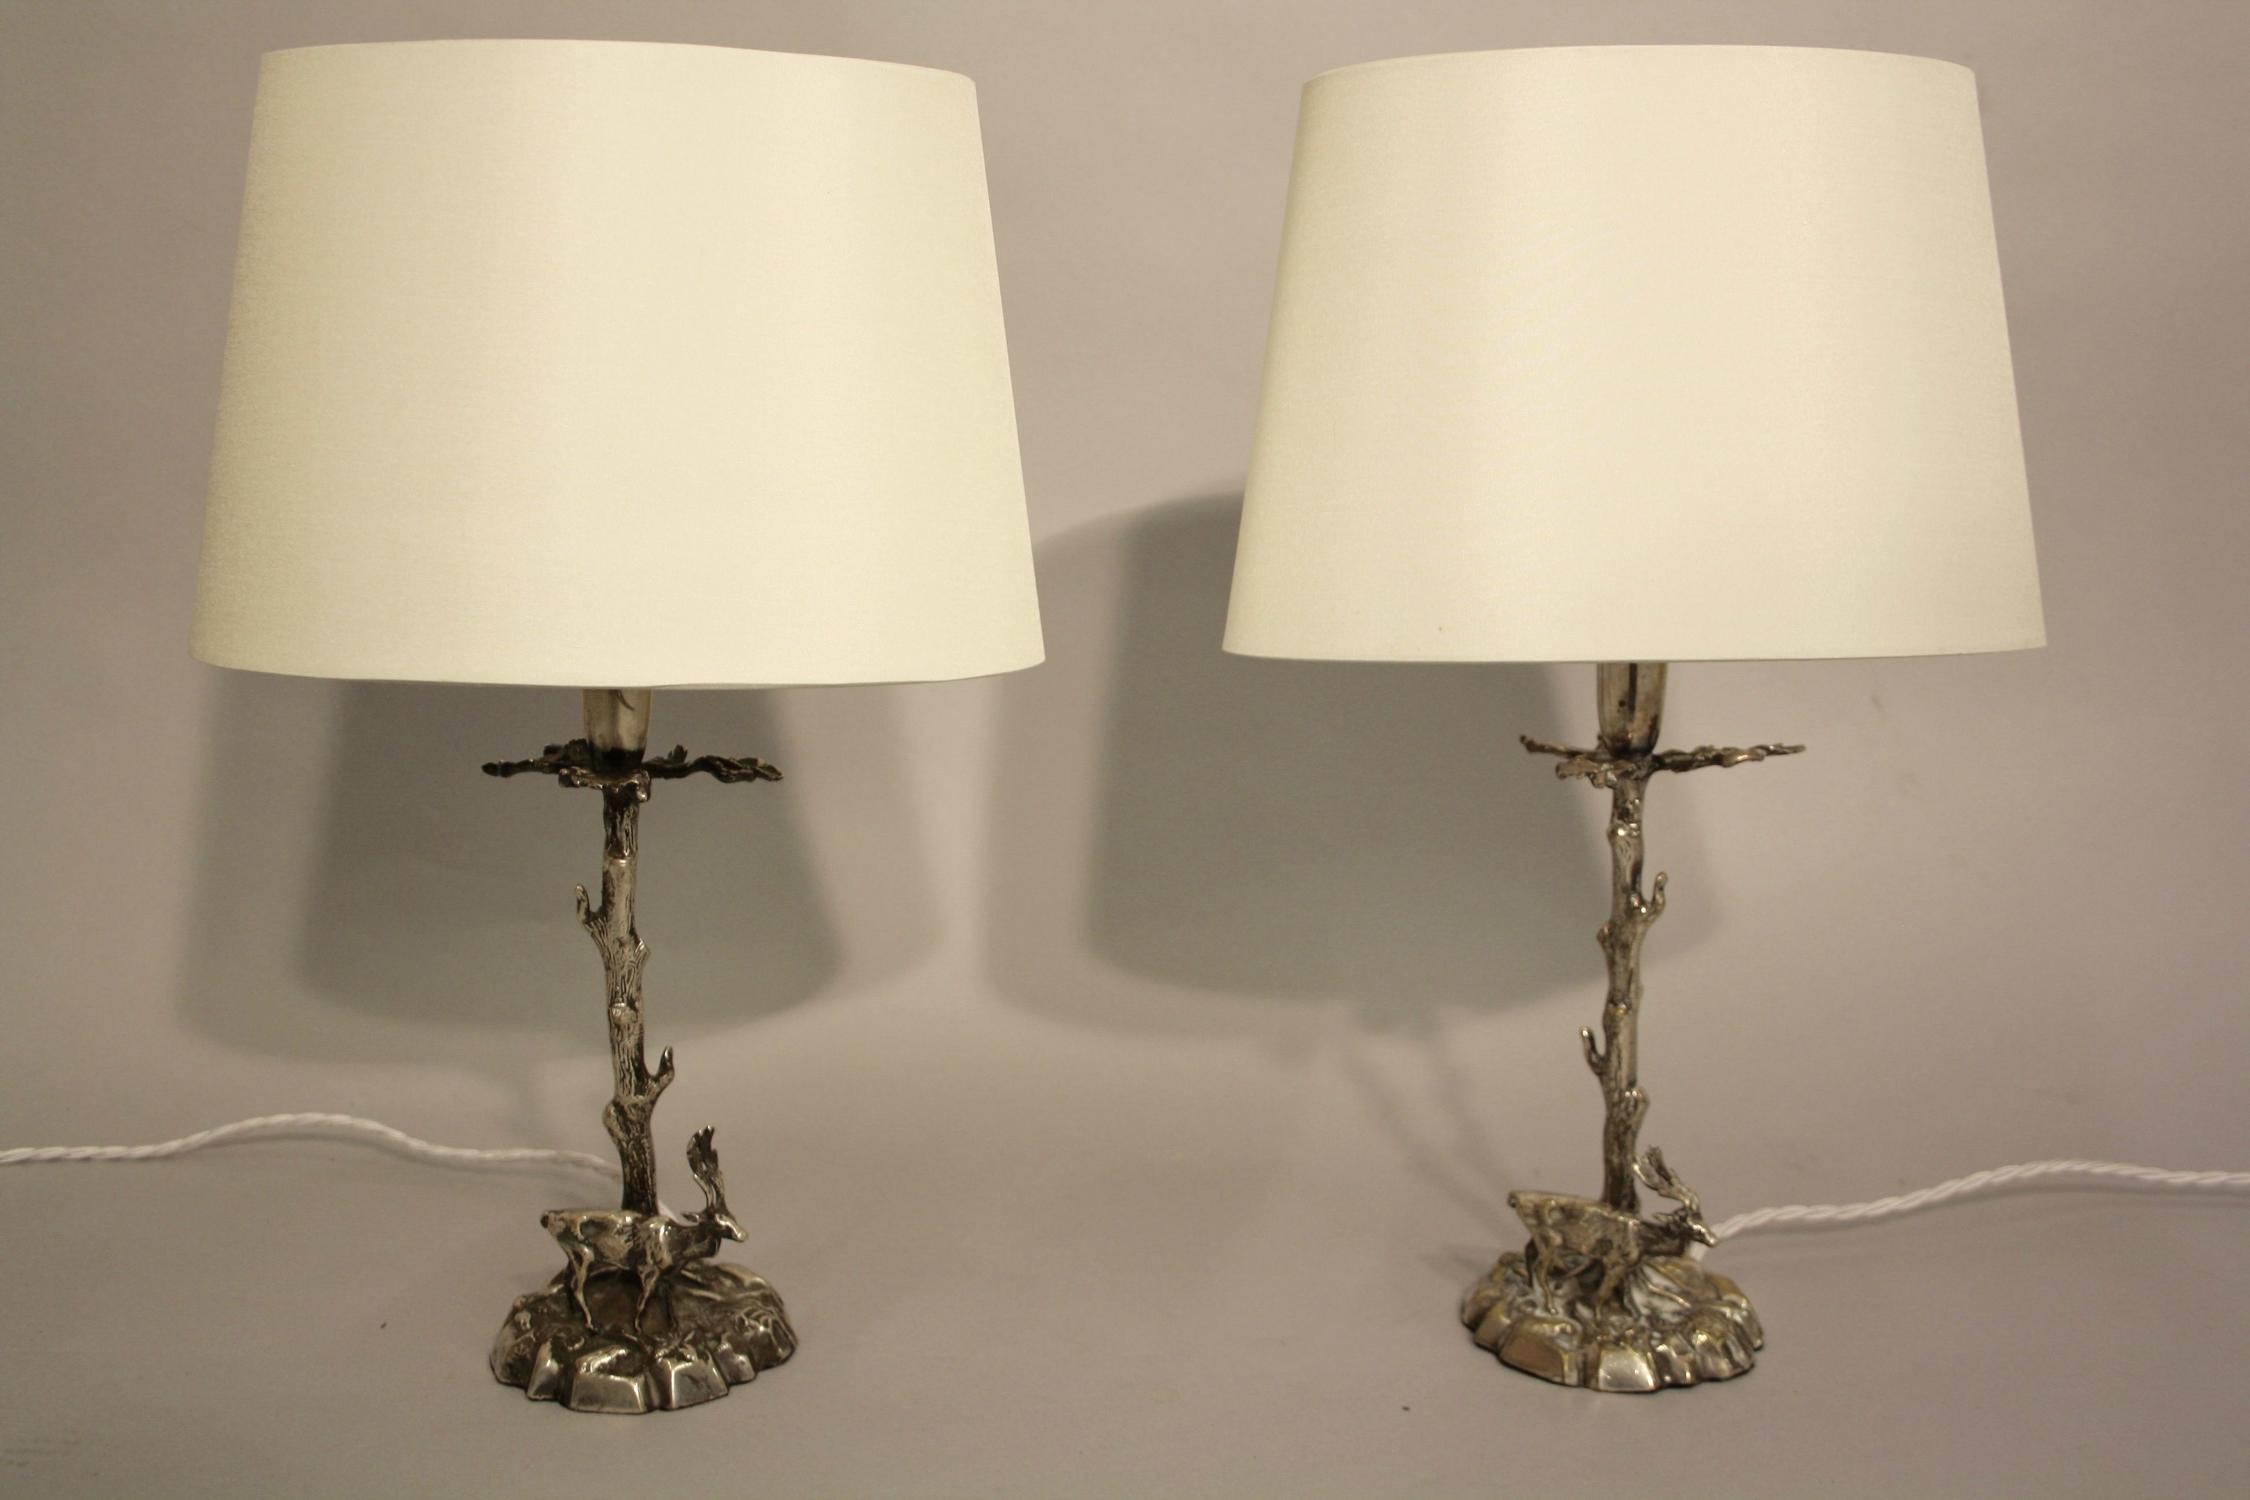 Pair of stag table lamps